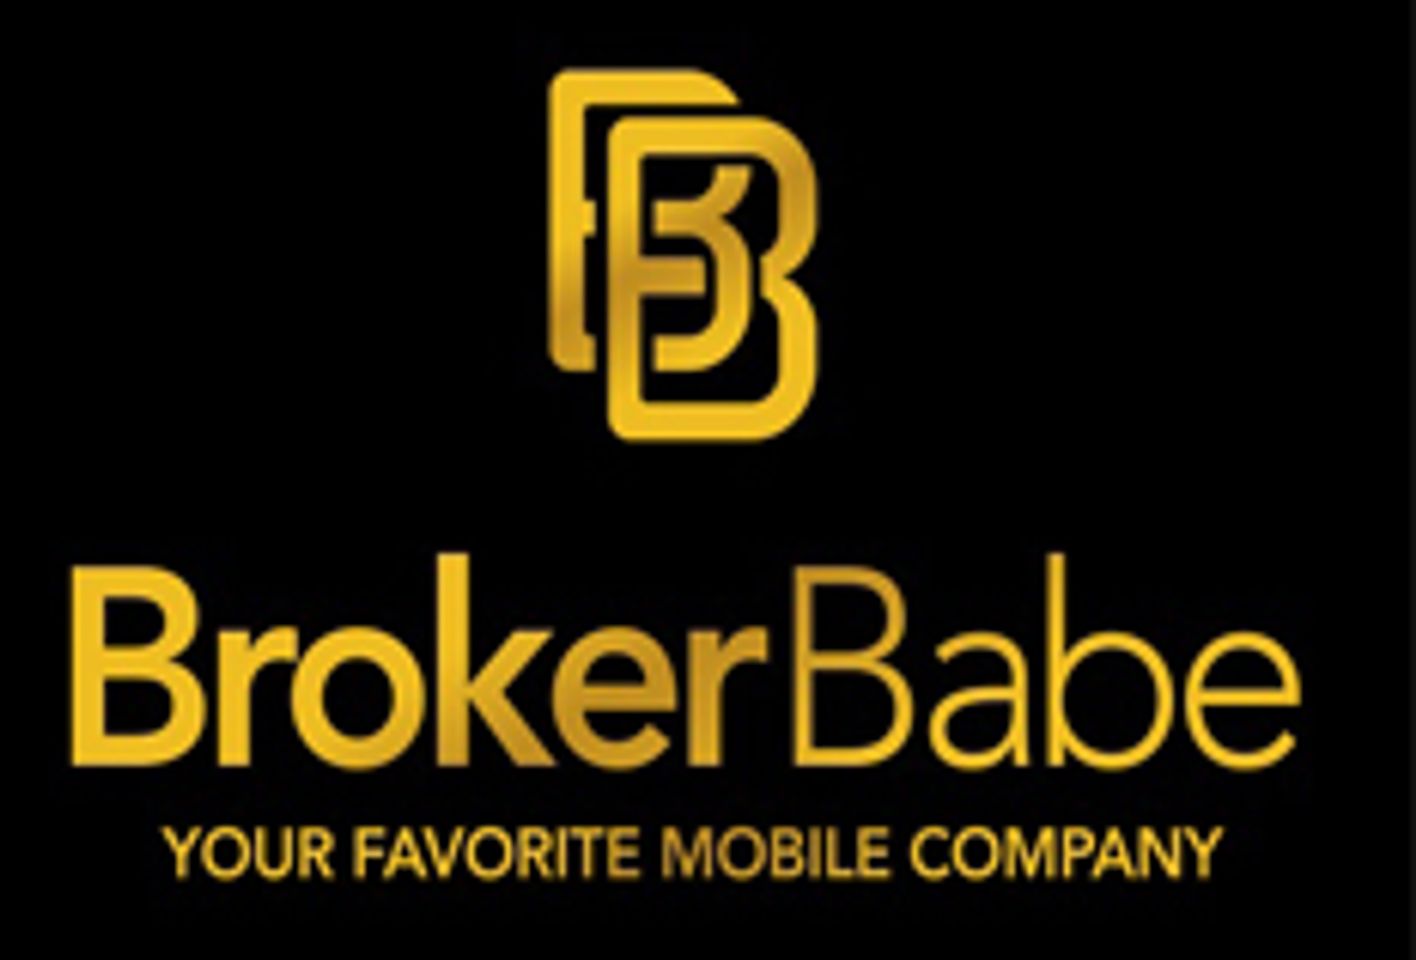 Brokerbabe.com Adds Norway to Product Roster